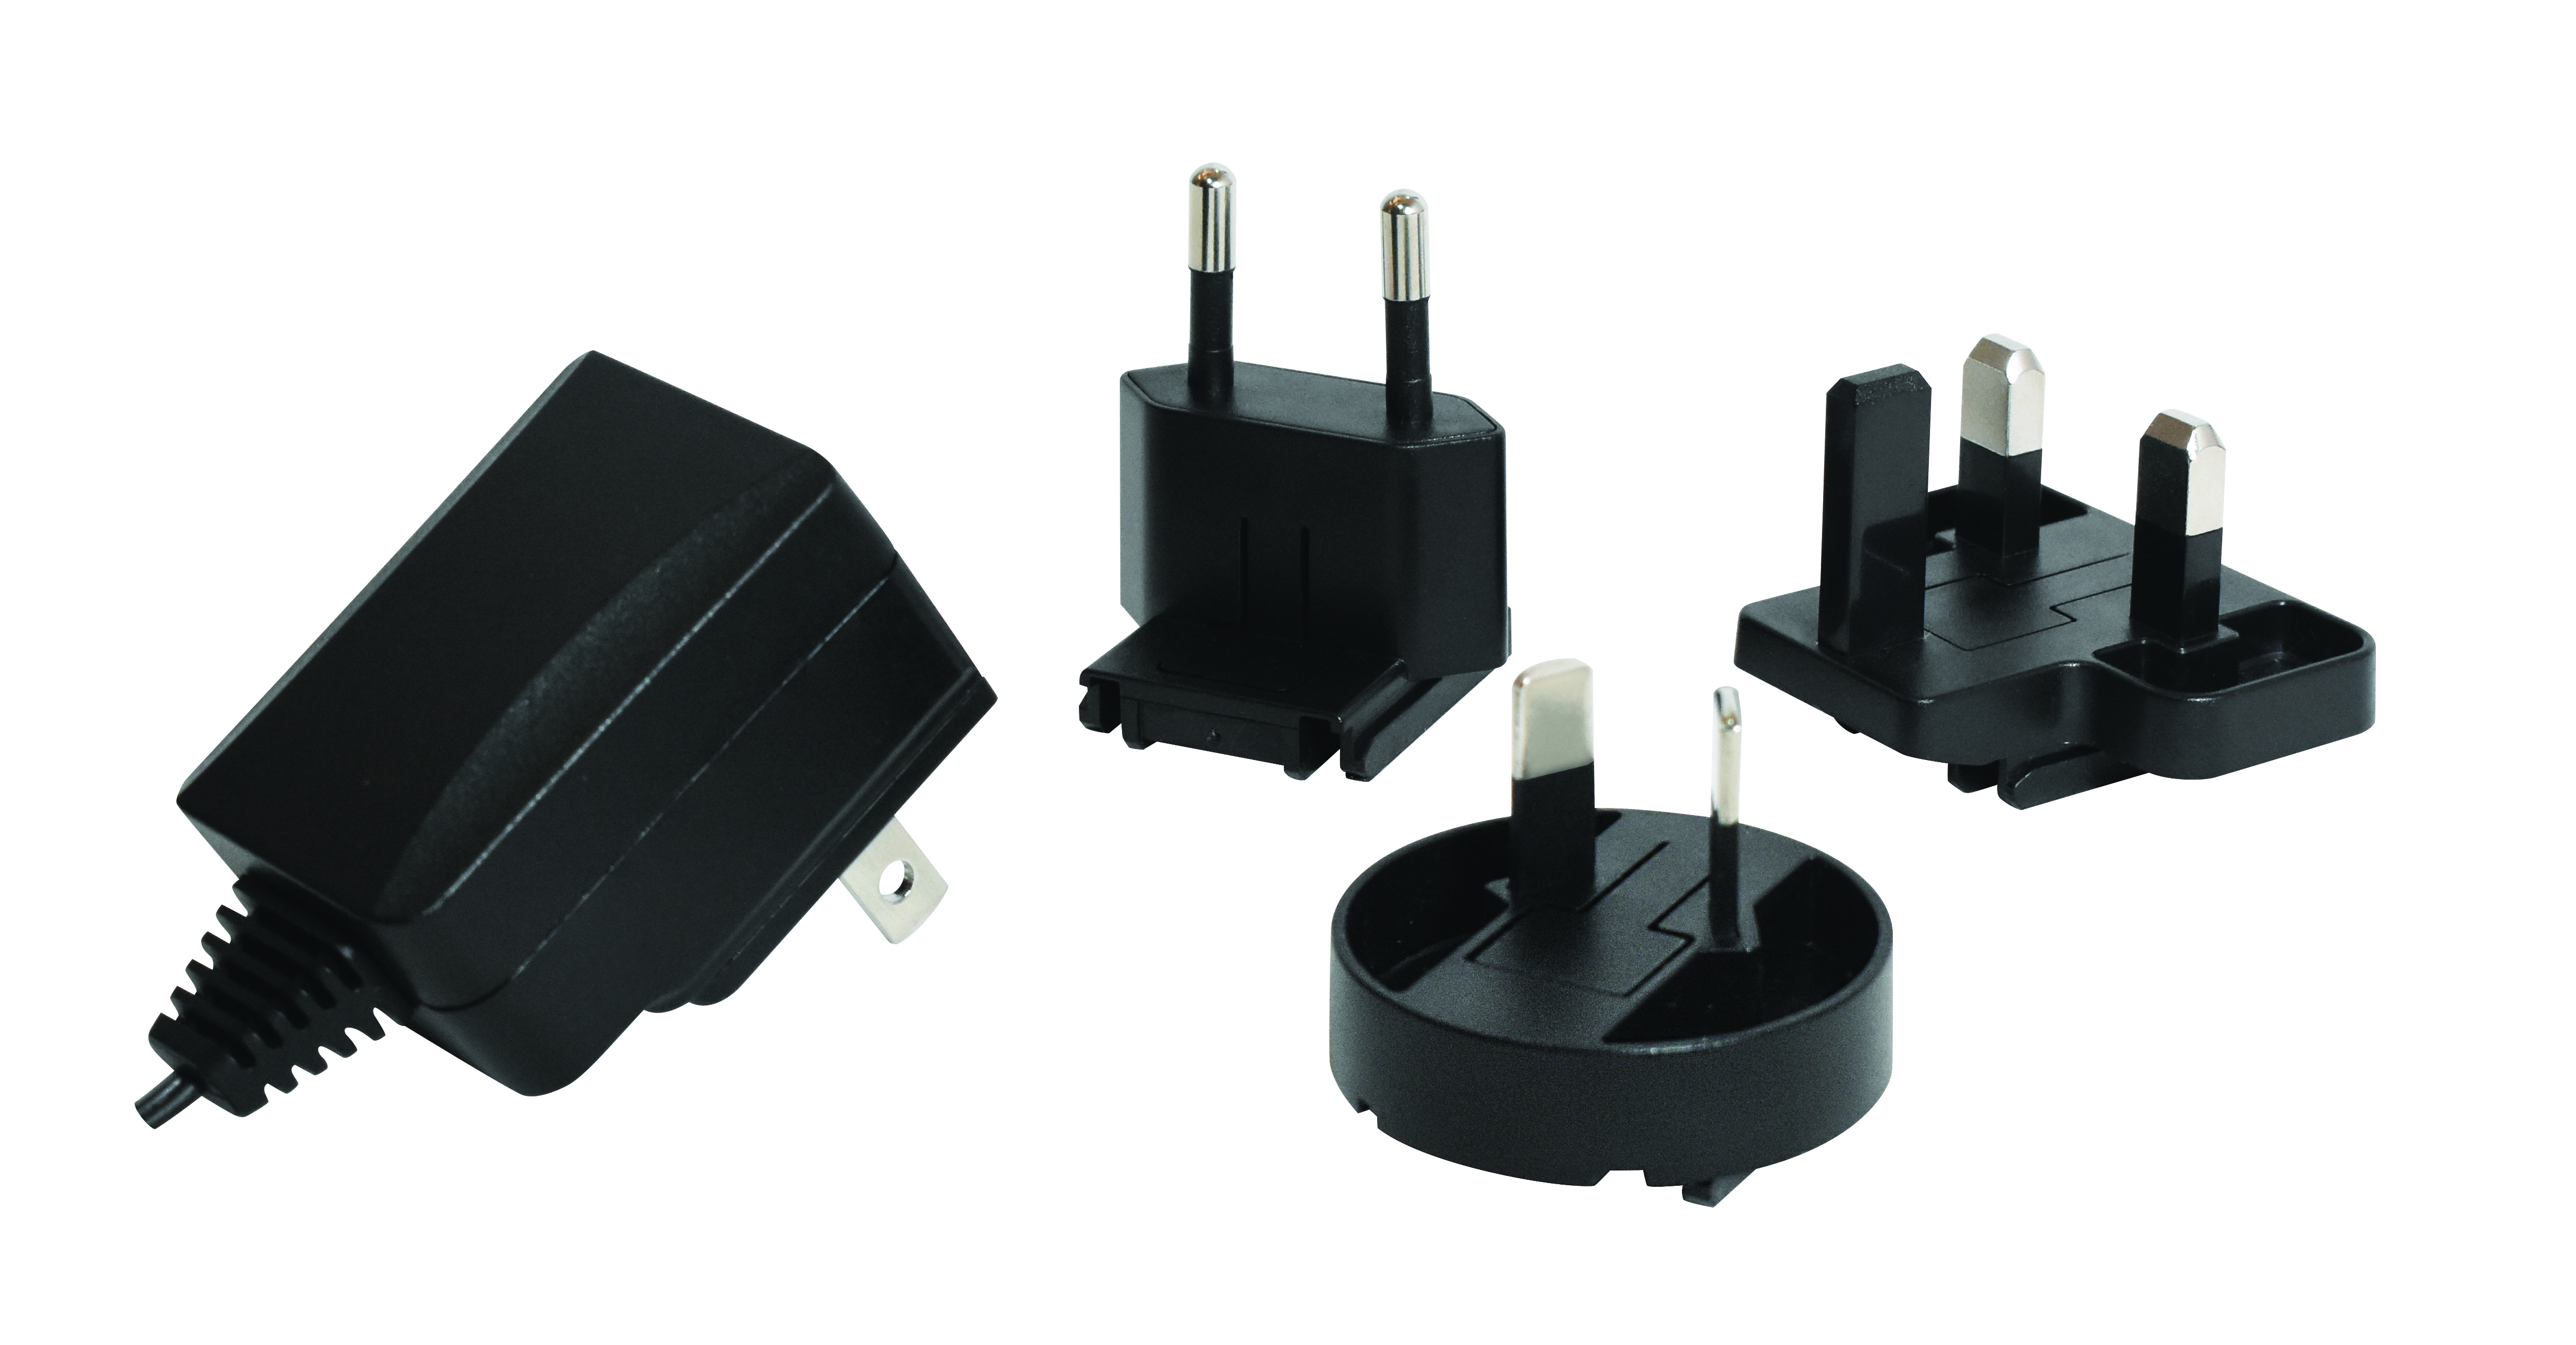 6 W Multi-Blade Power Adapter Boasts Ultra-Compact Package